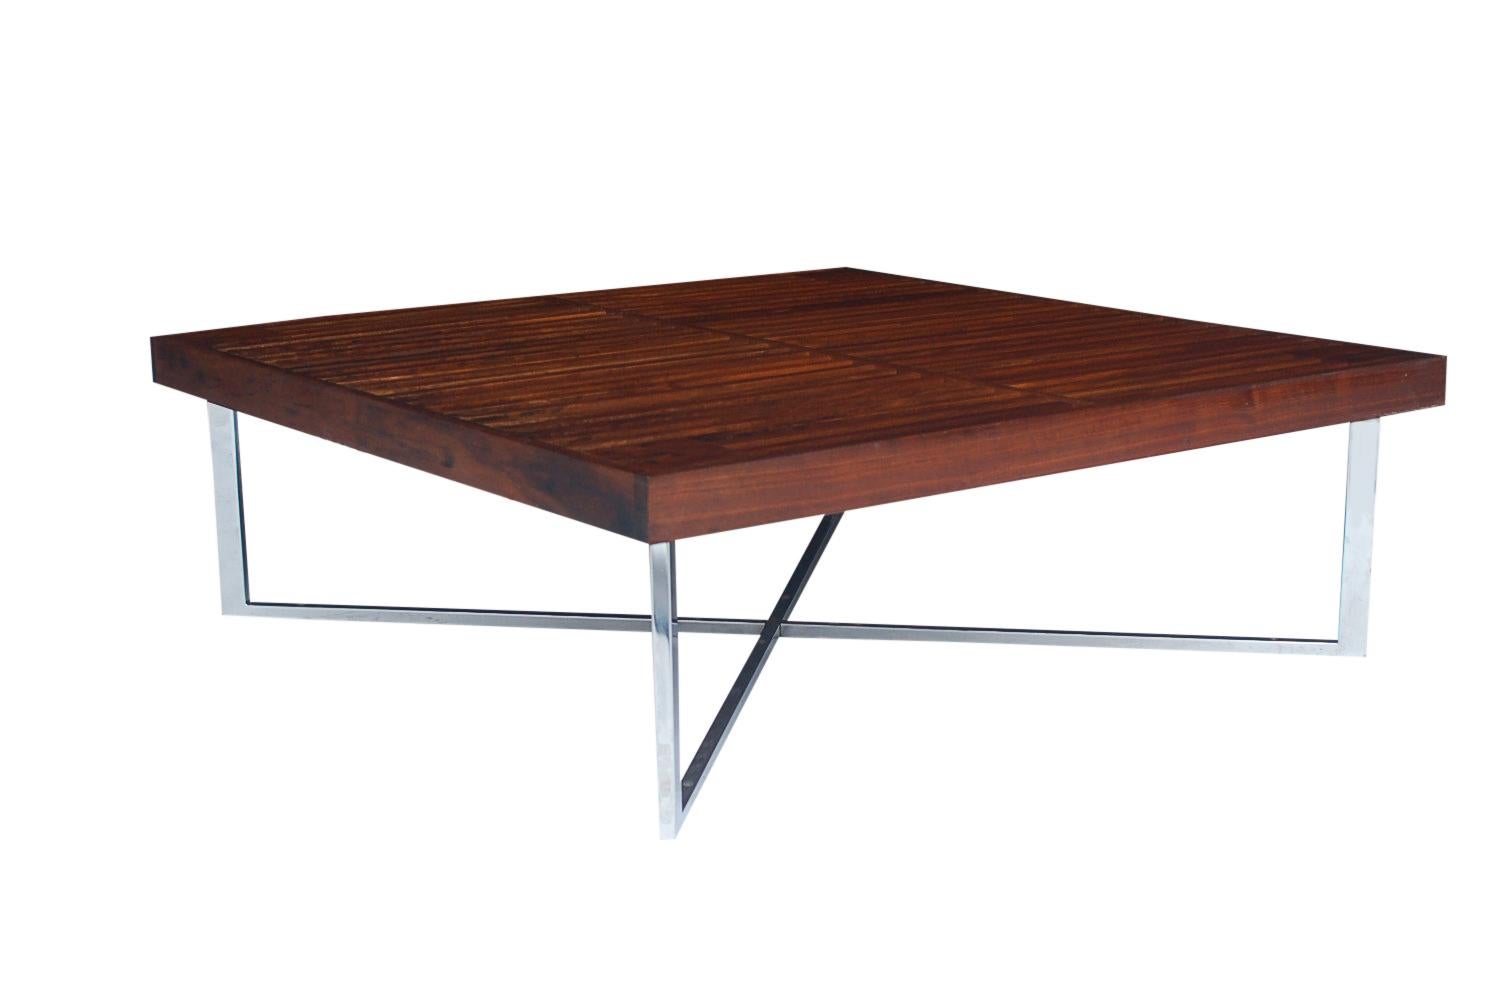 A super unique low profile coffee table in the style of George Nelson. It features a slatted walnut top with polished steel X-base. Very chic looking.